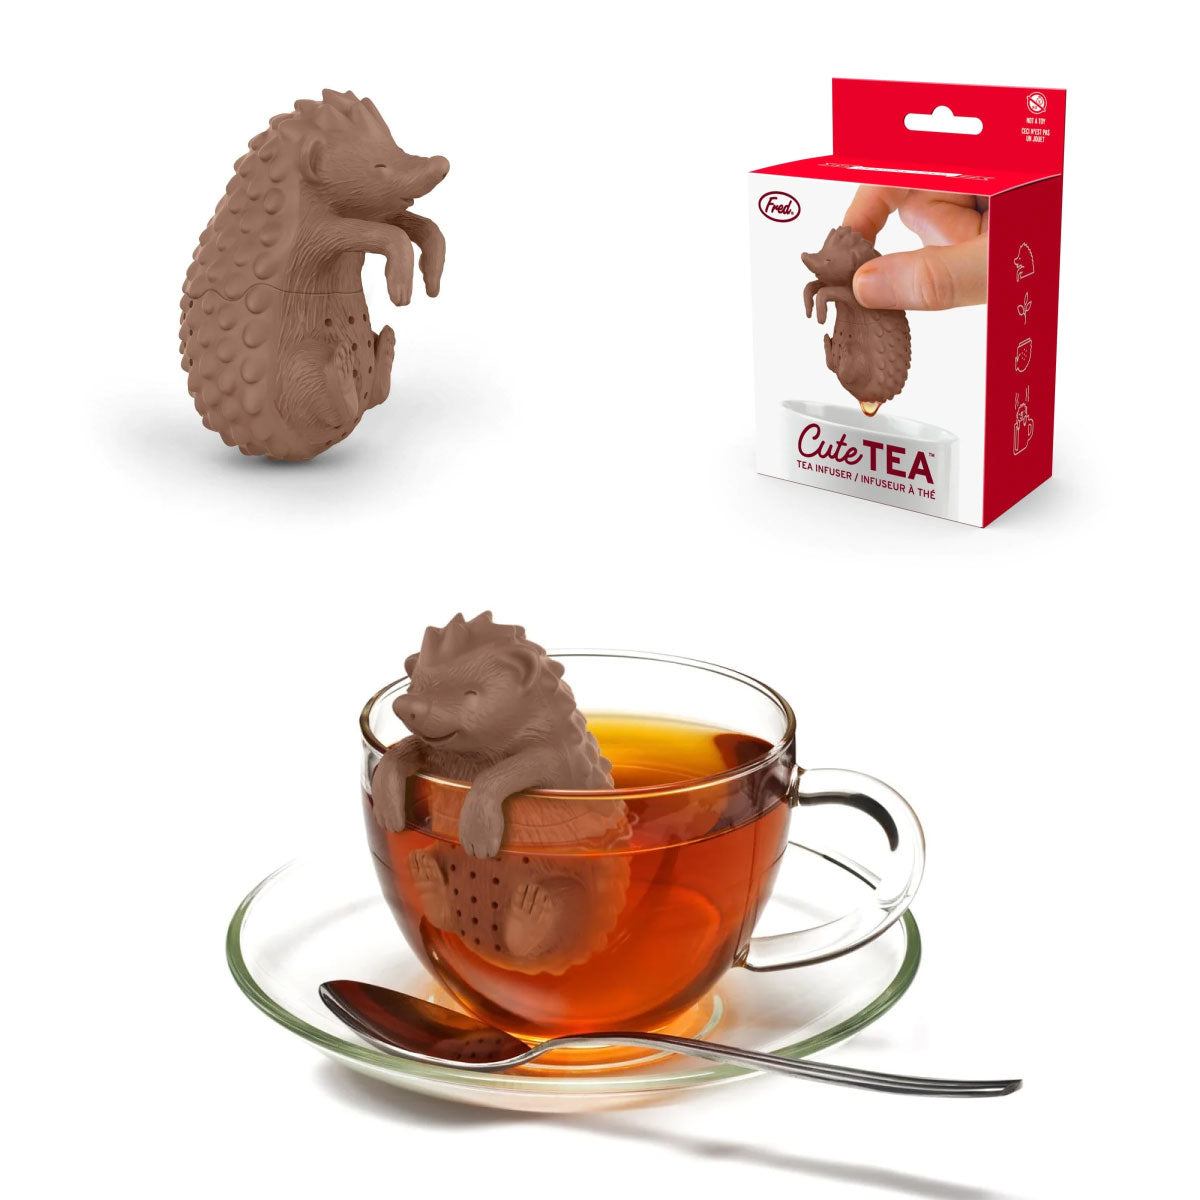 Up To 25% Off on Fred and Friends Silicone Tea